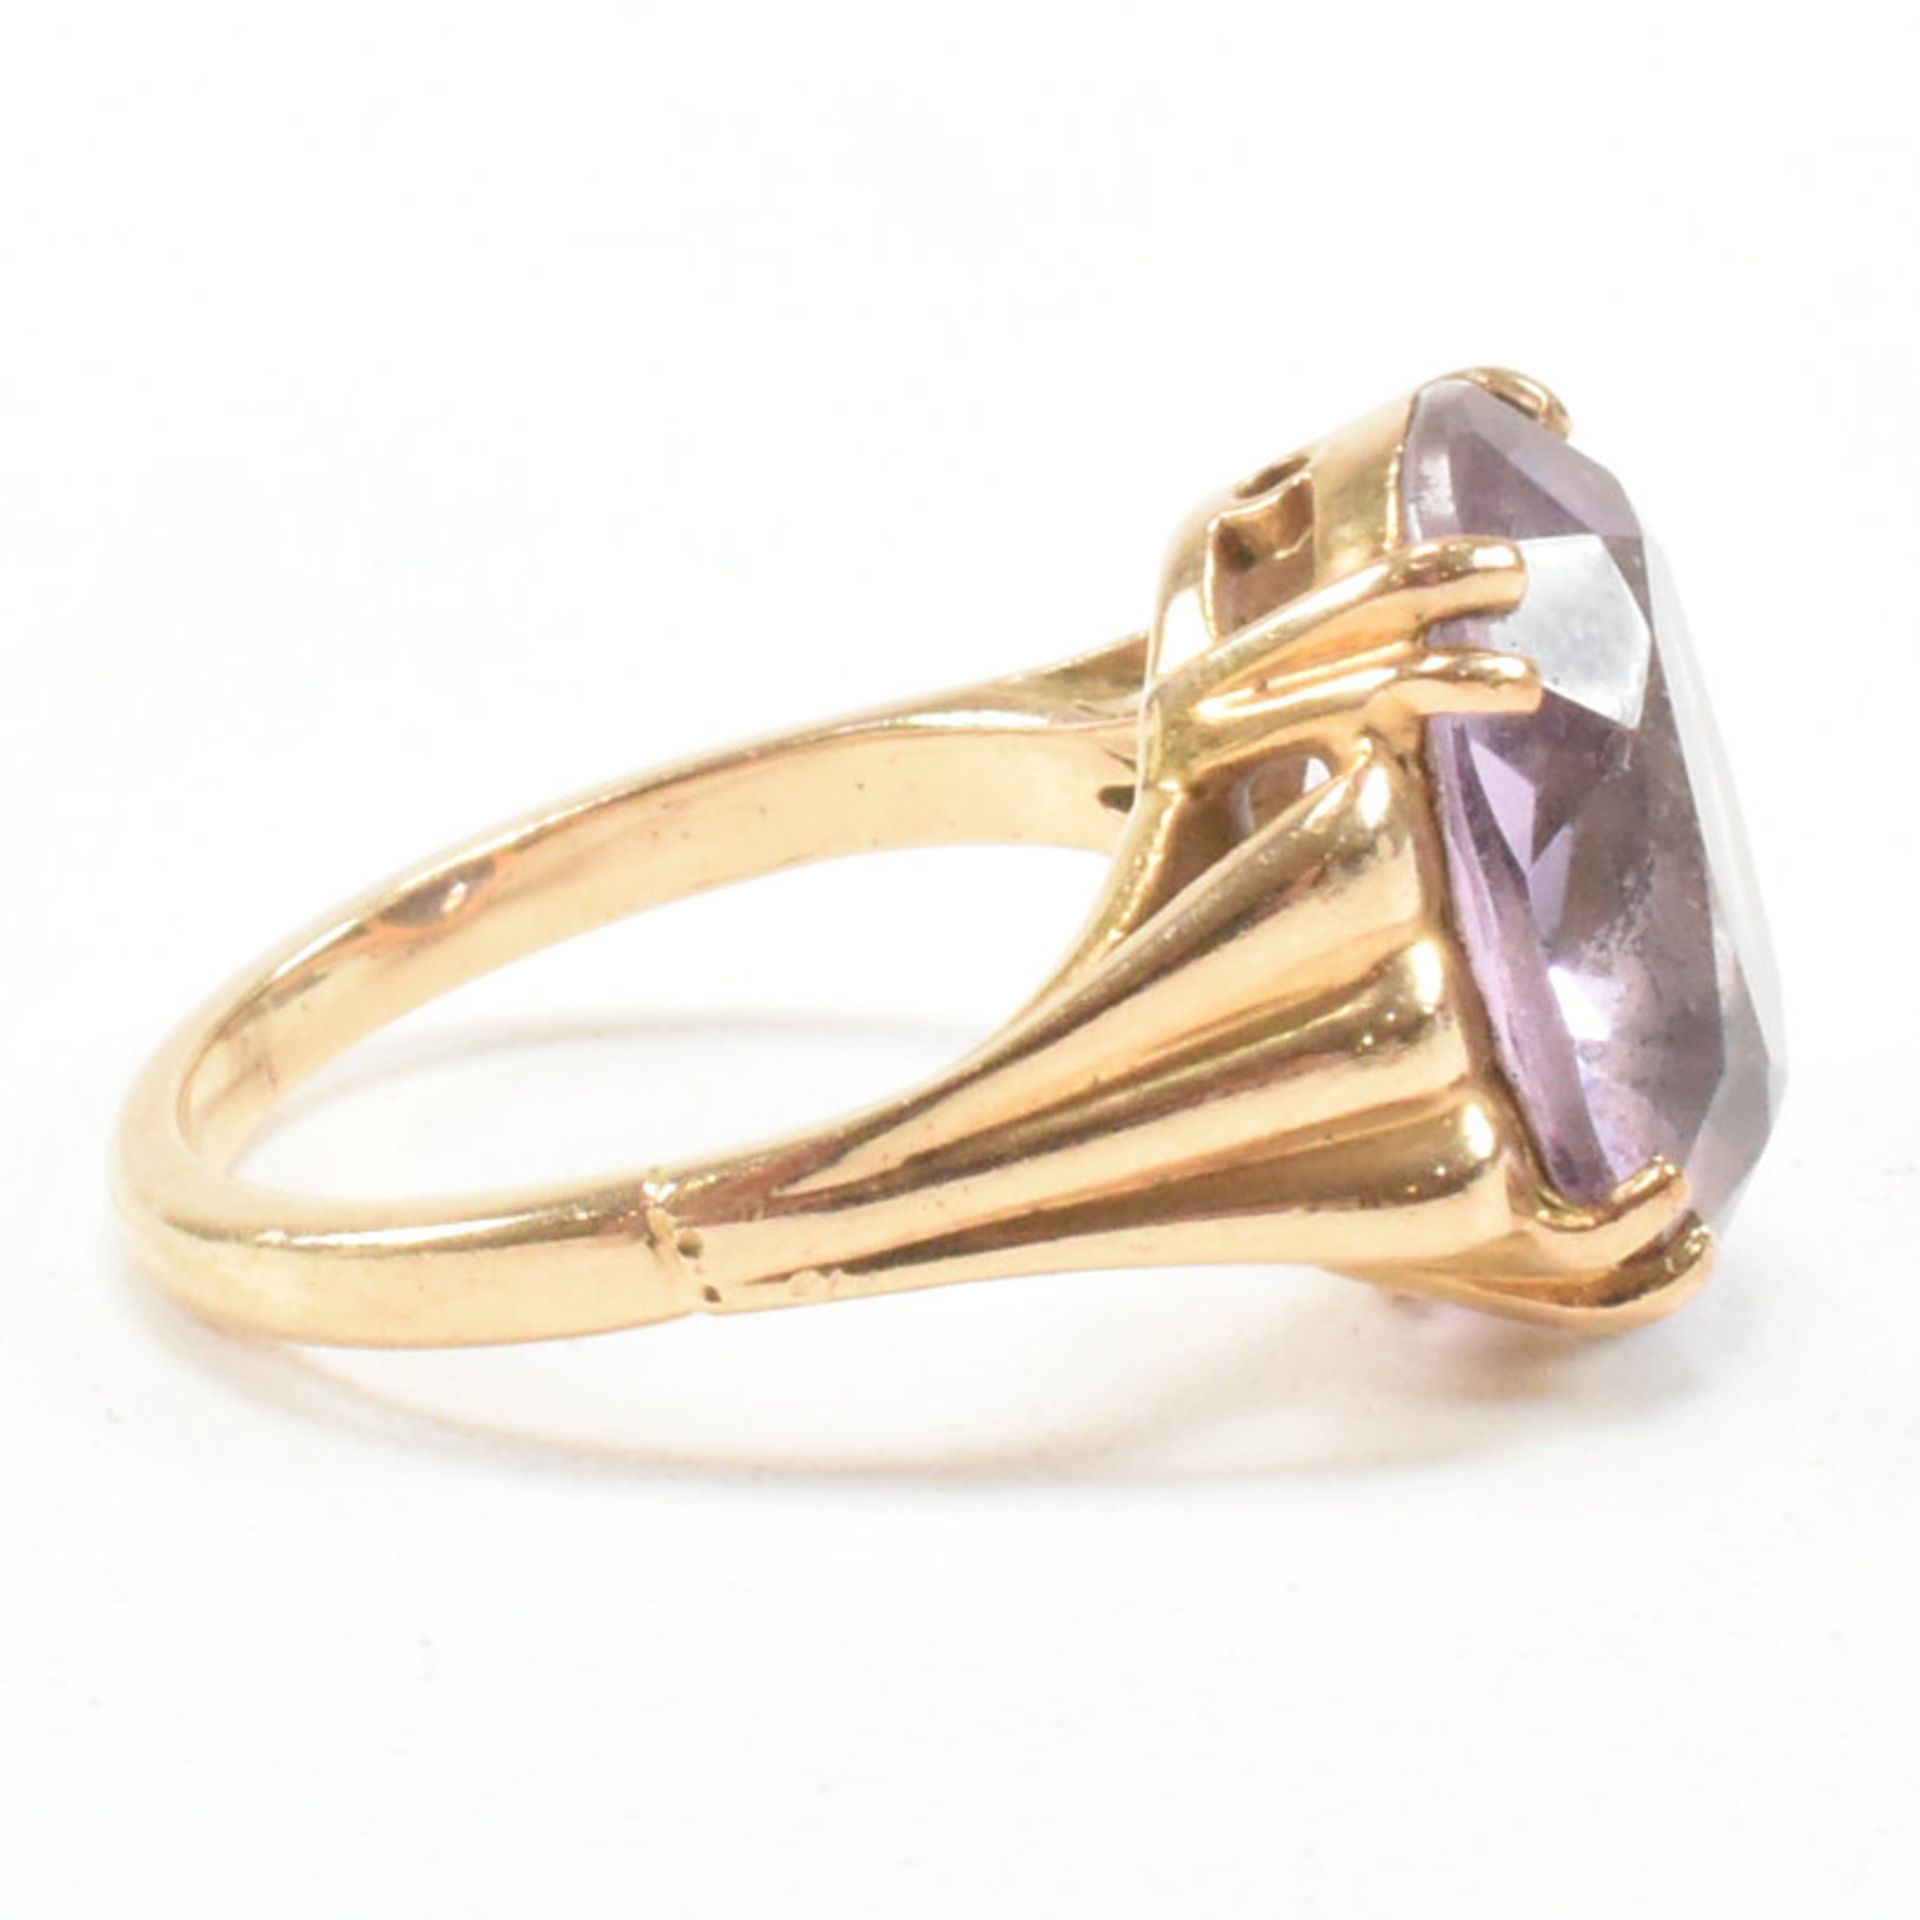 VINTAGE HALLMARKED 9CT GOLD & AMETHYST SOLITAIRE RING - Image 6 of 9